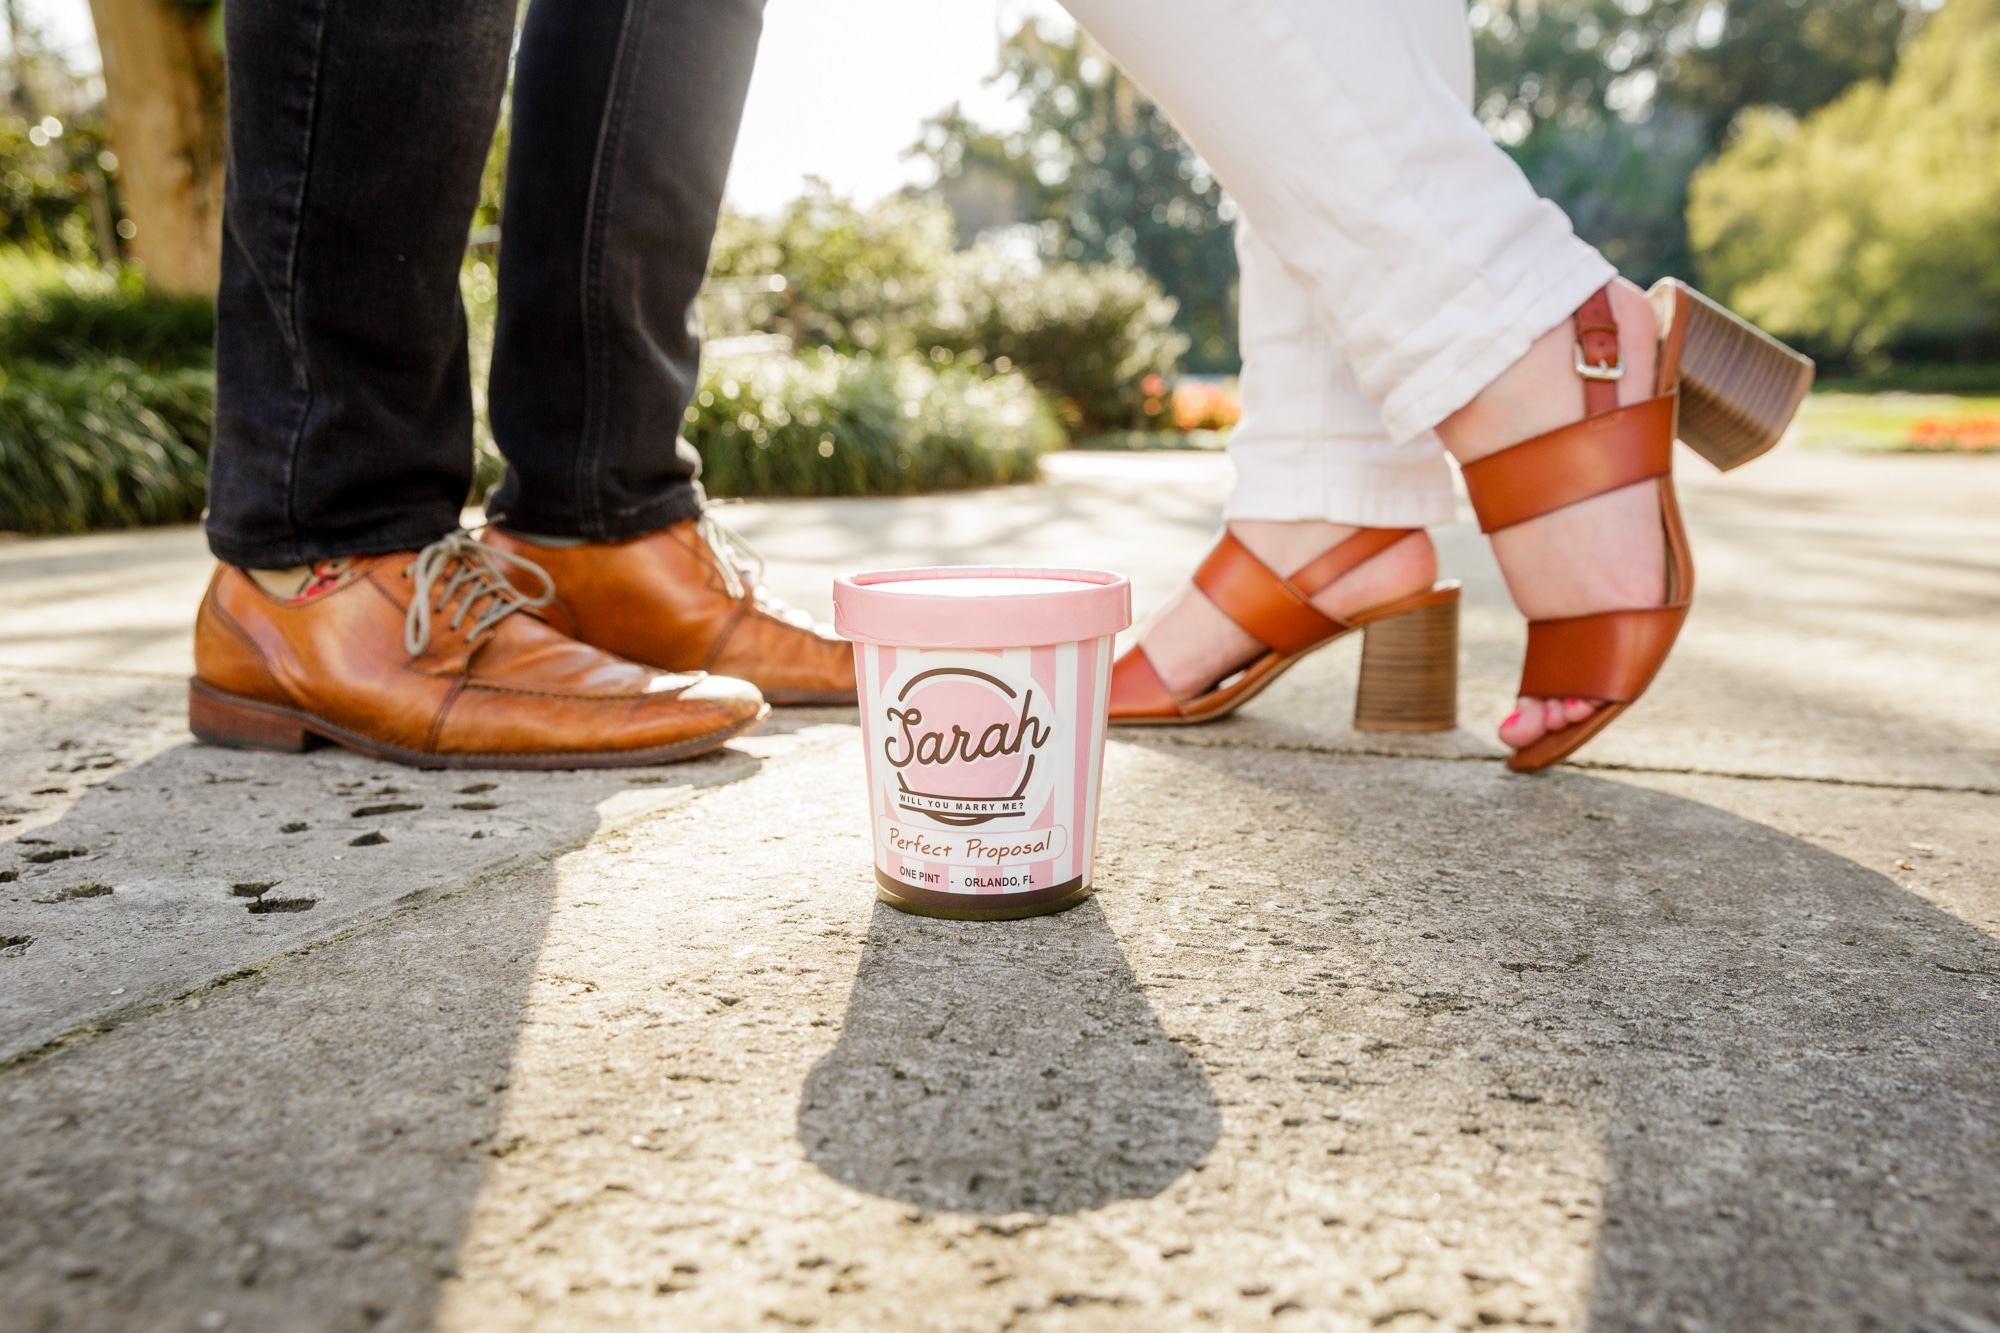 close up picture of couples feet with shoes on outside and a homemade proposal prop of a kelly's homemade ice cream container